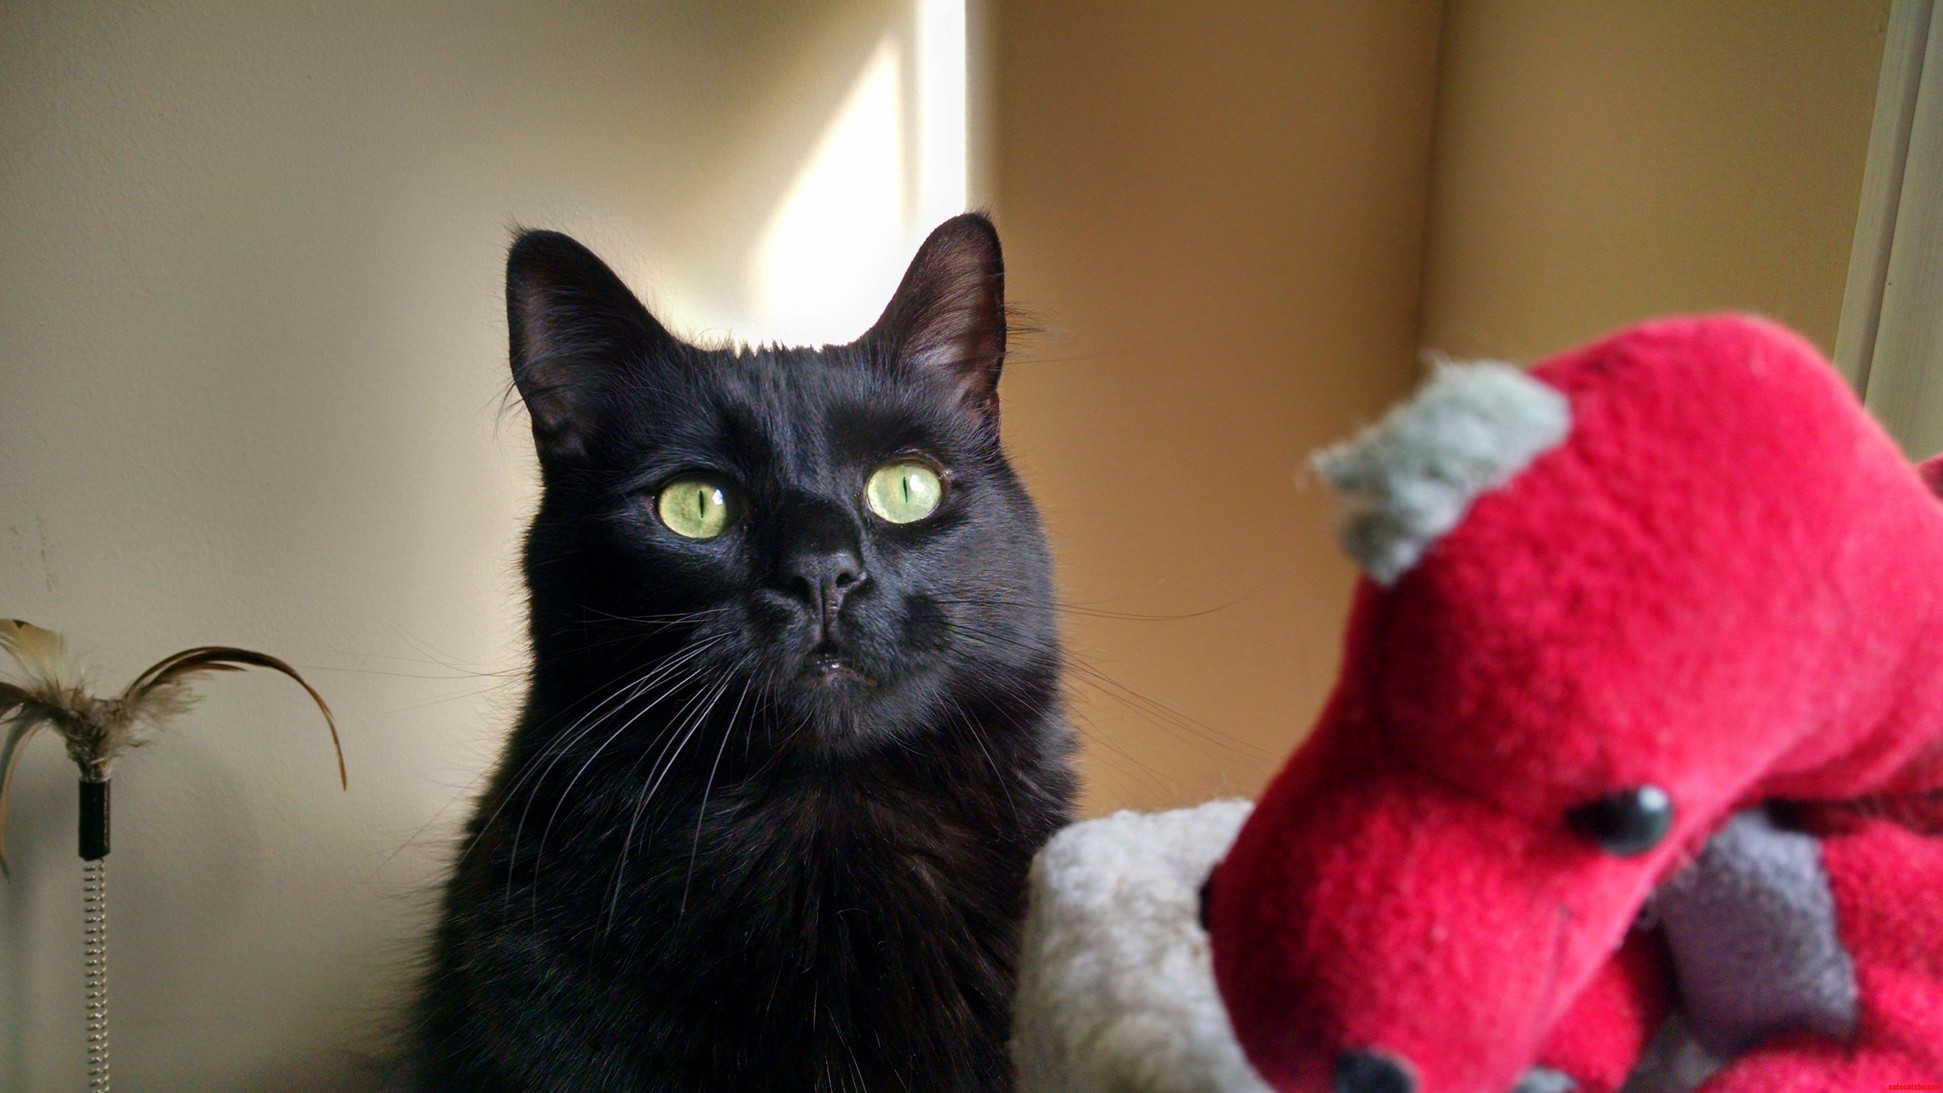 My Black Cat And His Favorite Toy Dragon.